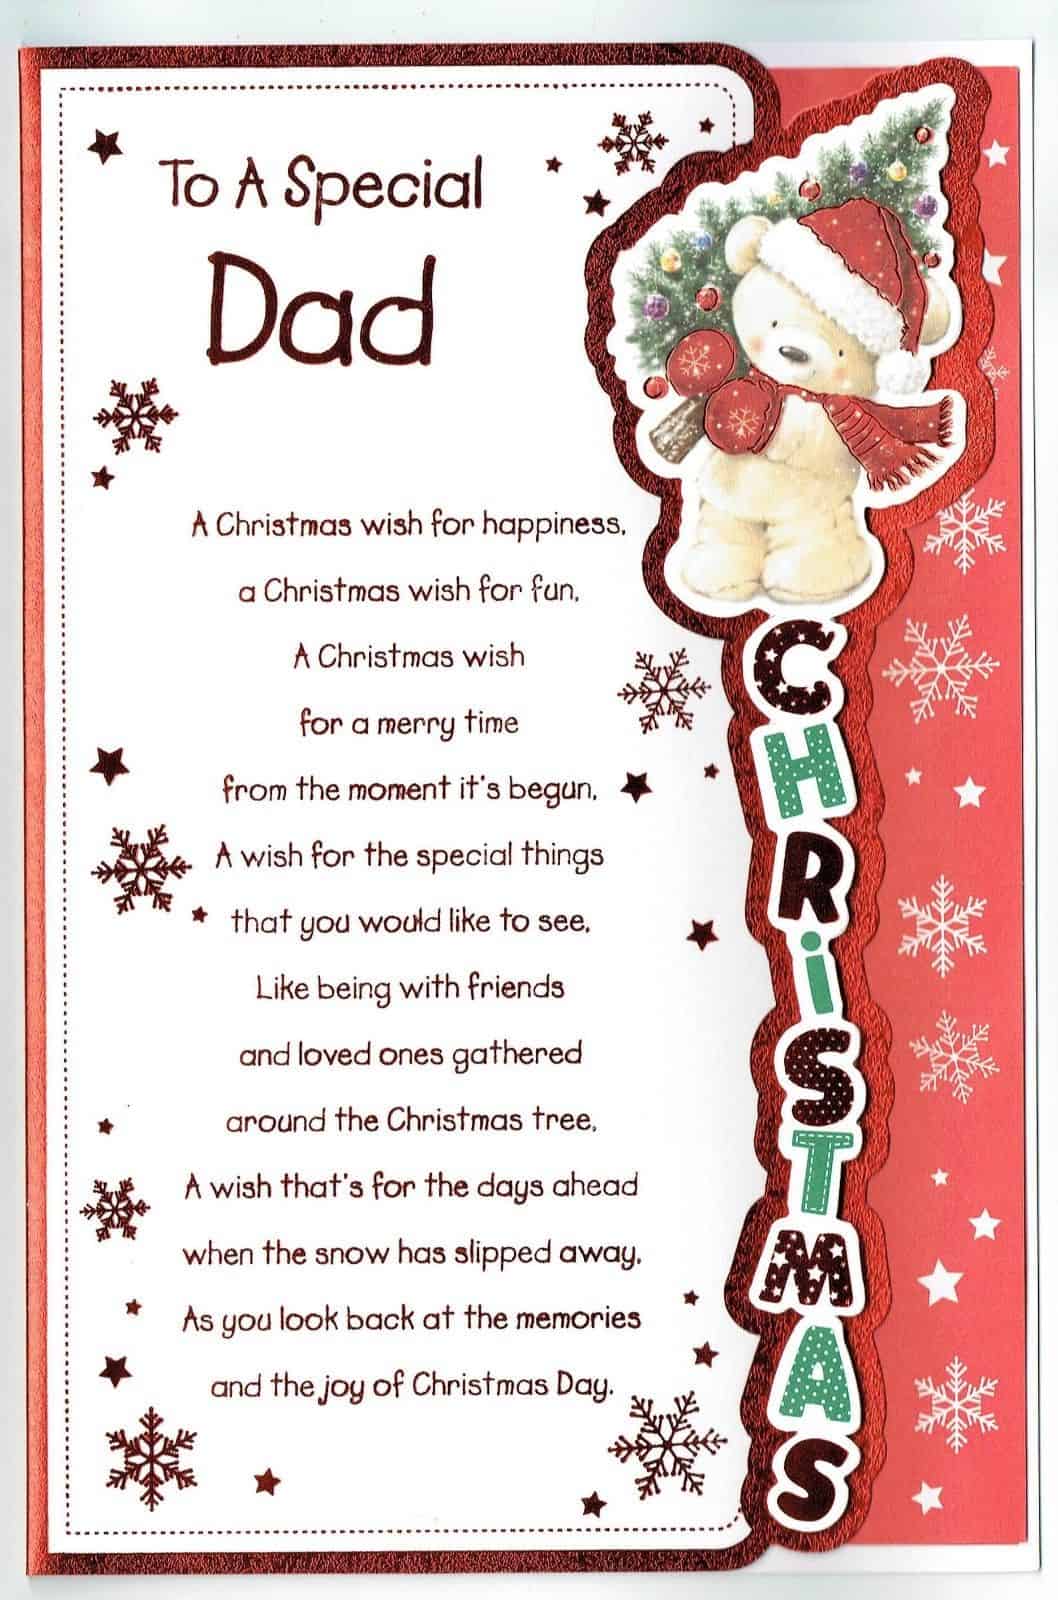 Dad Christmas Card With Sentiment Verse - With Love Gifts & Cards